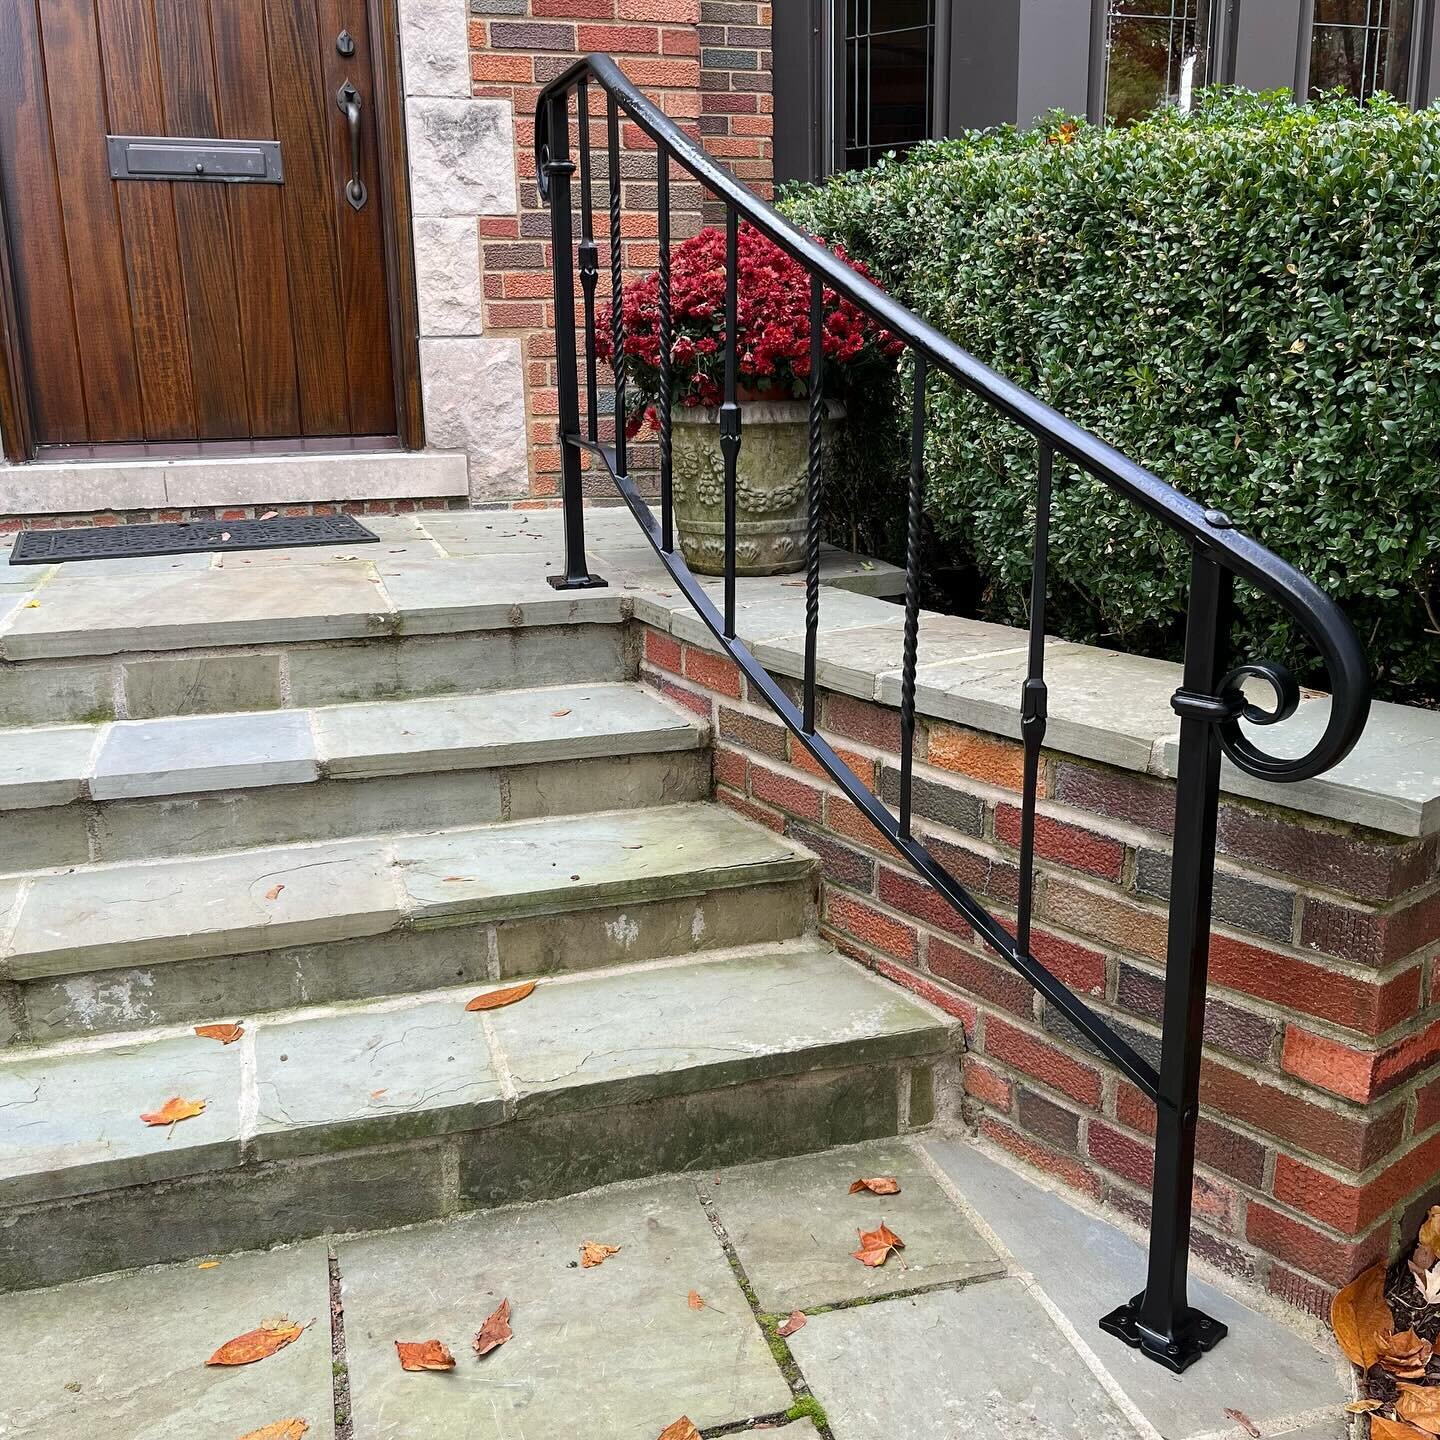 Curved handrail with all the trimmings. Opposing twisted pickets alternating with floral ornaments set on the diamond, punched and drifted tenon joinery, quatrefoil feet, custom forged trim and cap profiles. 

#railing #rail #handrail #blacksmith #ma